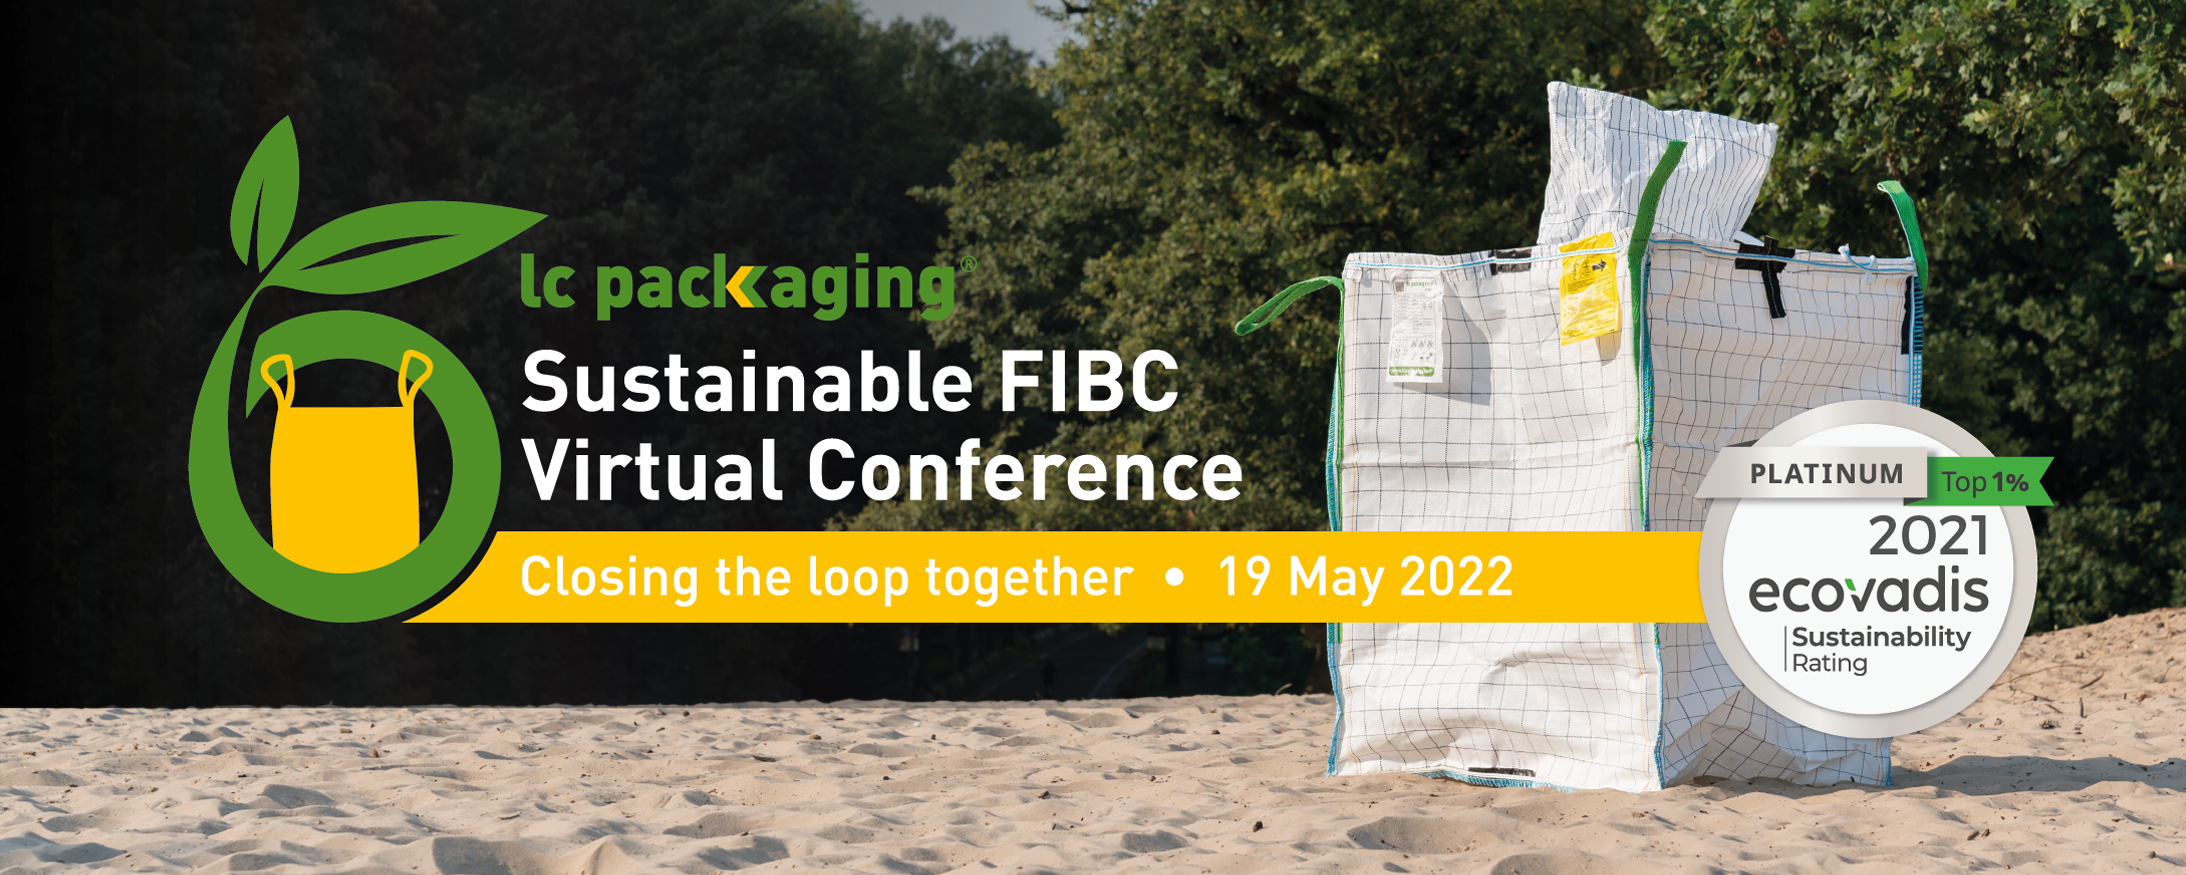 BANNER Virtual Sustainable FIBC Conference 2022 - big and with green button 8 by 3 s.png